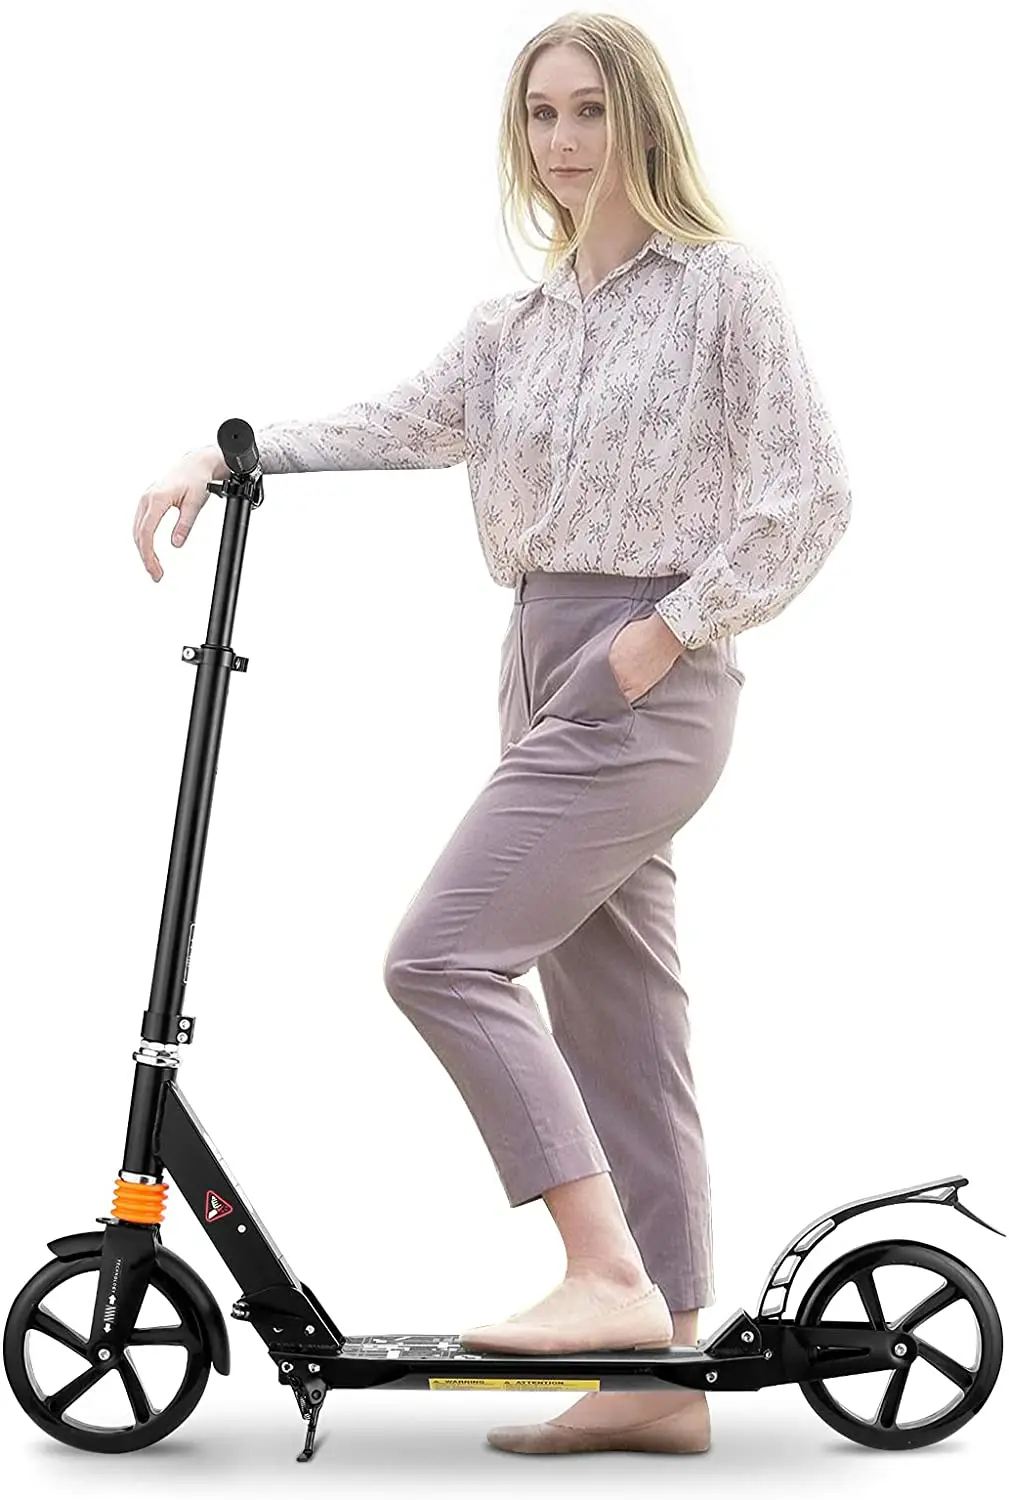 

Scooters for Adults Teens, Kick Scooter with Adjustable Height Dual Suspension and Shoulder Strap 84 inches Big Wheels Scooter S